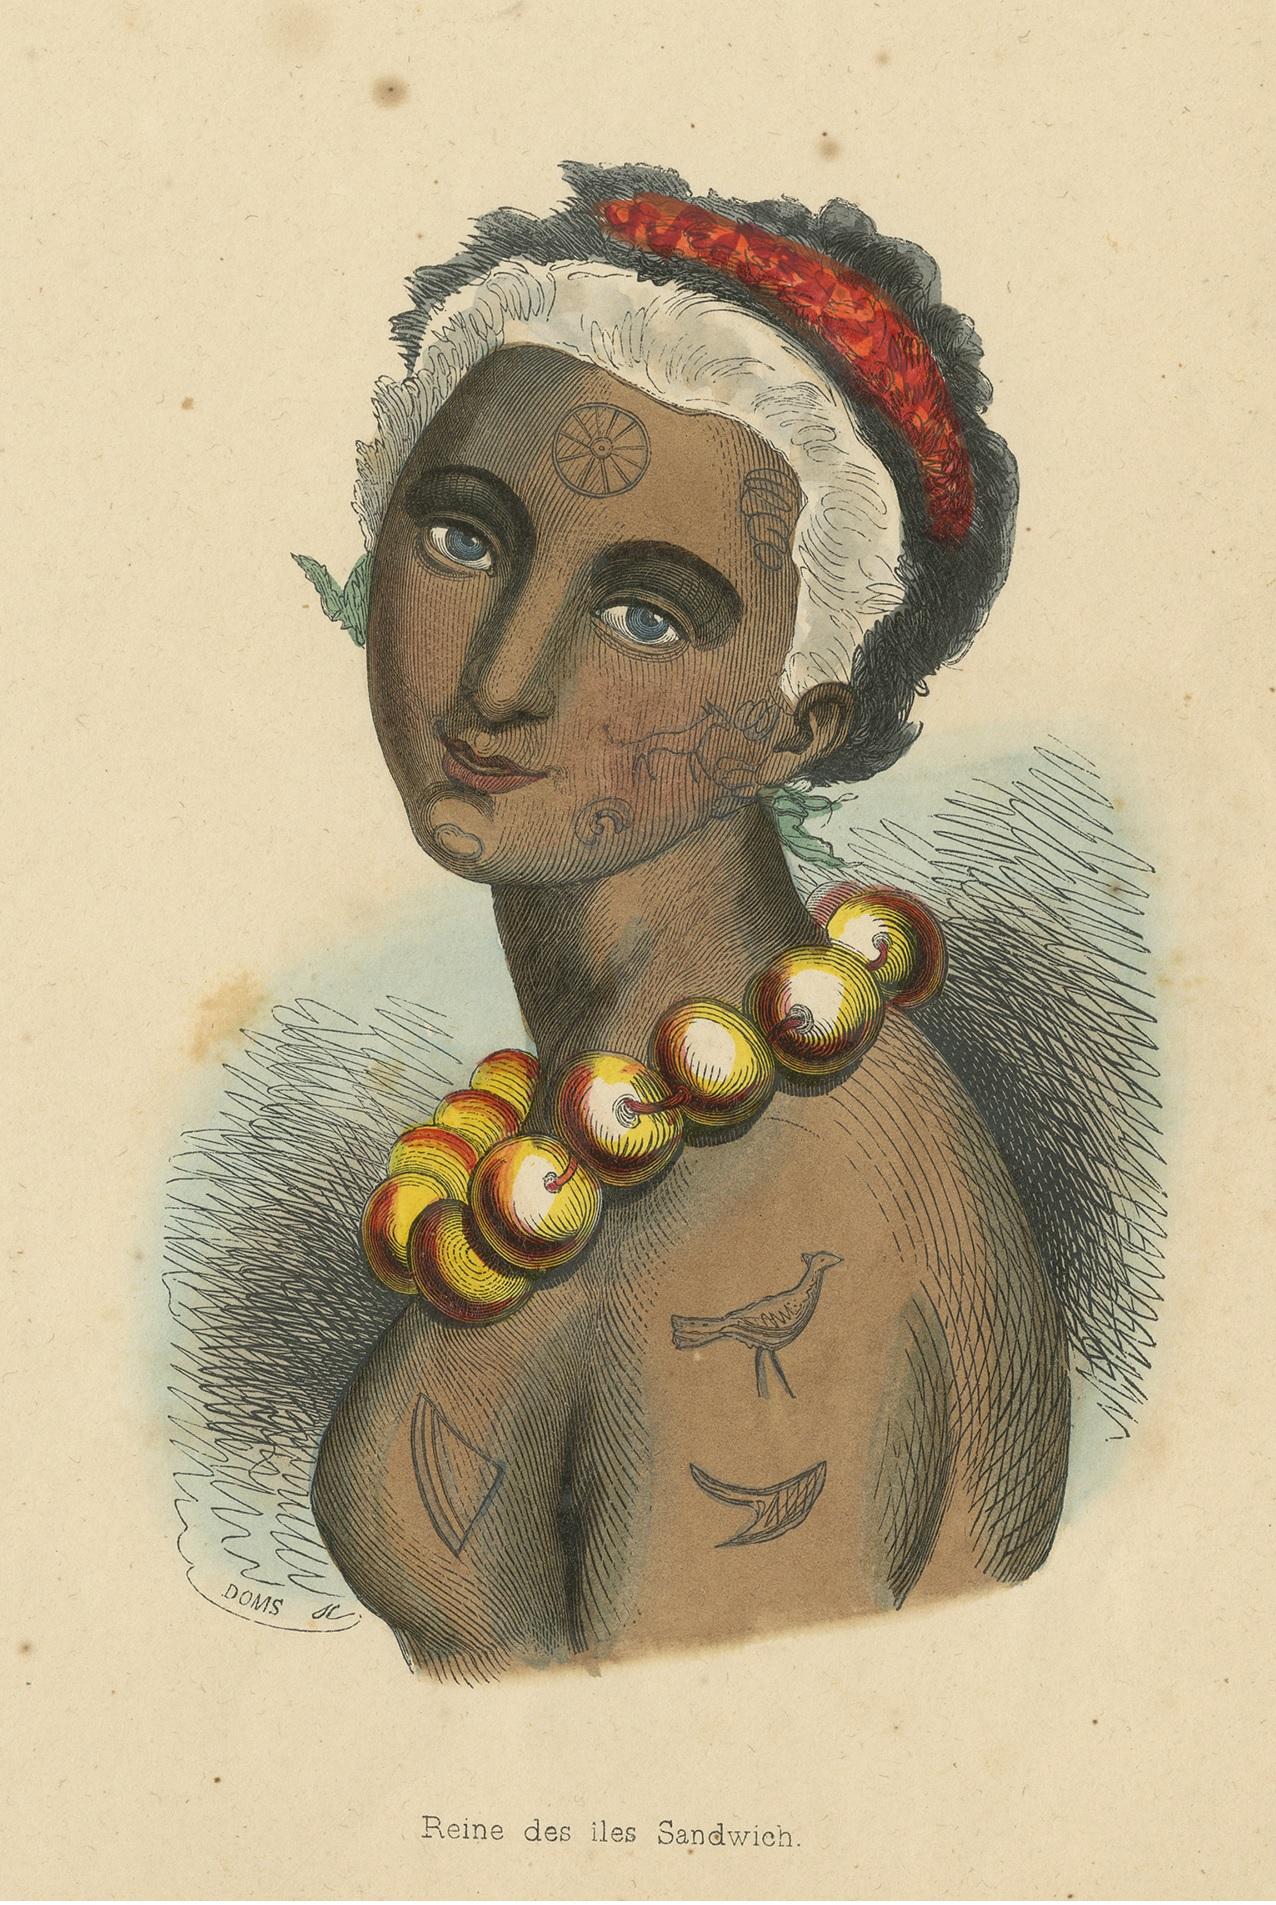 19th Century Antique Costume Print of a Woman of the Sandwich Islands by Wahlen, 1843